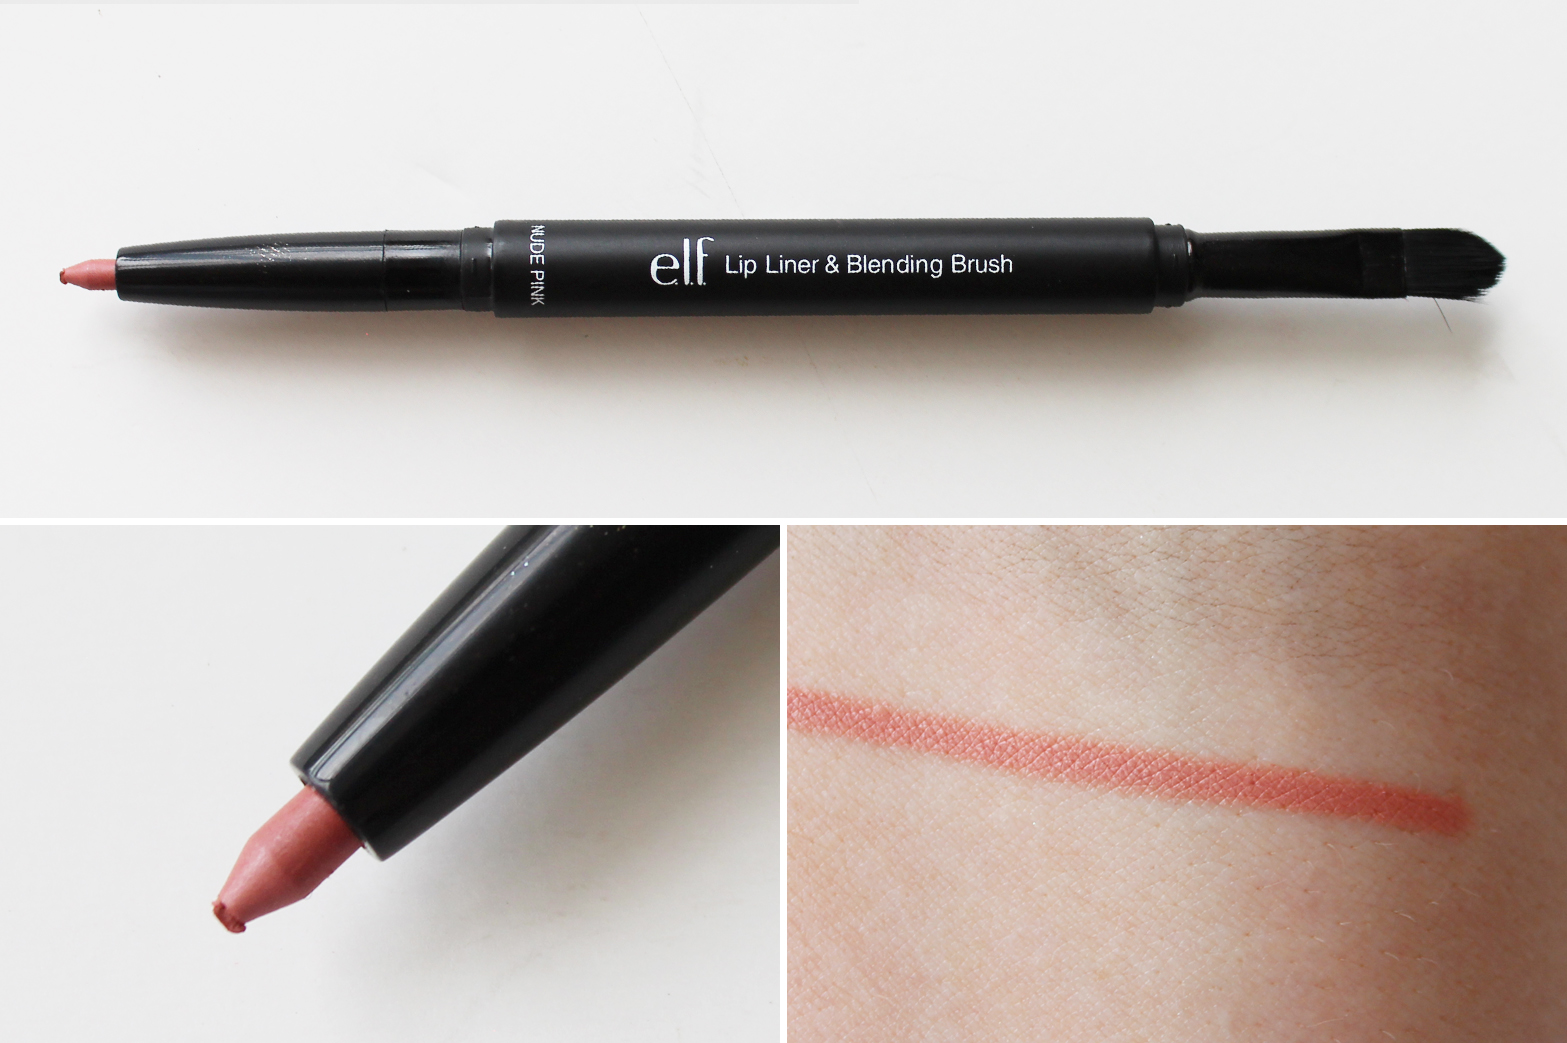 iHERB HAUL | e.l.f. Studio, Queen Helene + More - Swatches + First Impressions - CassandraMyee